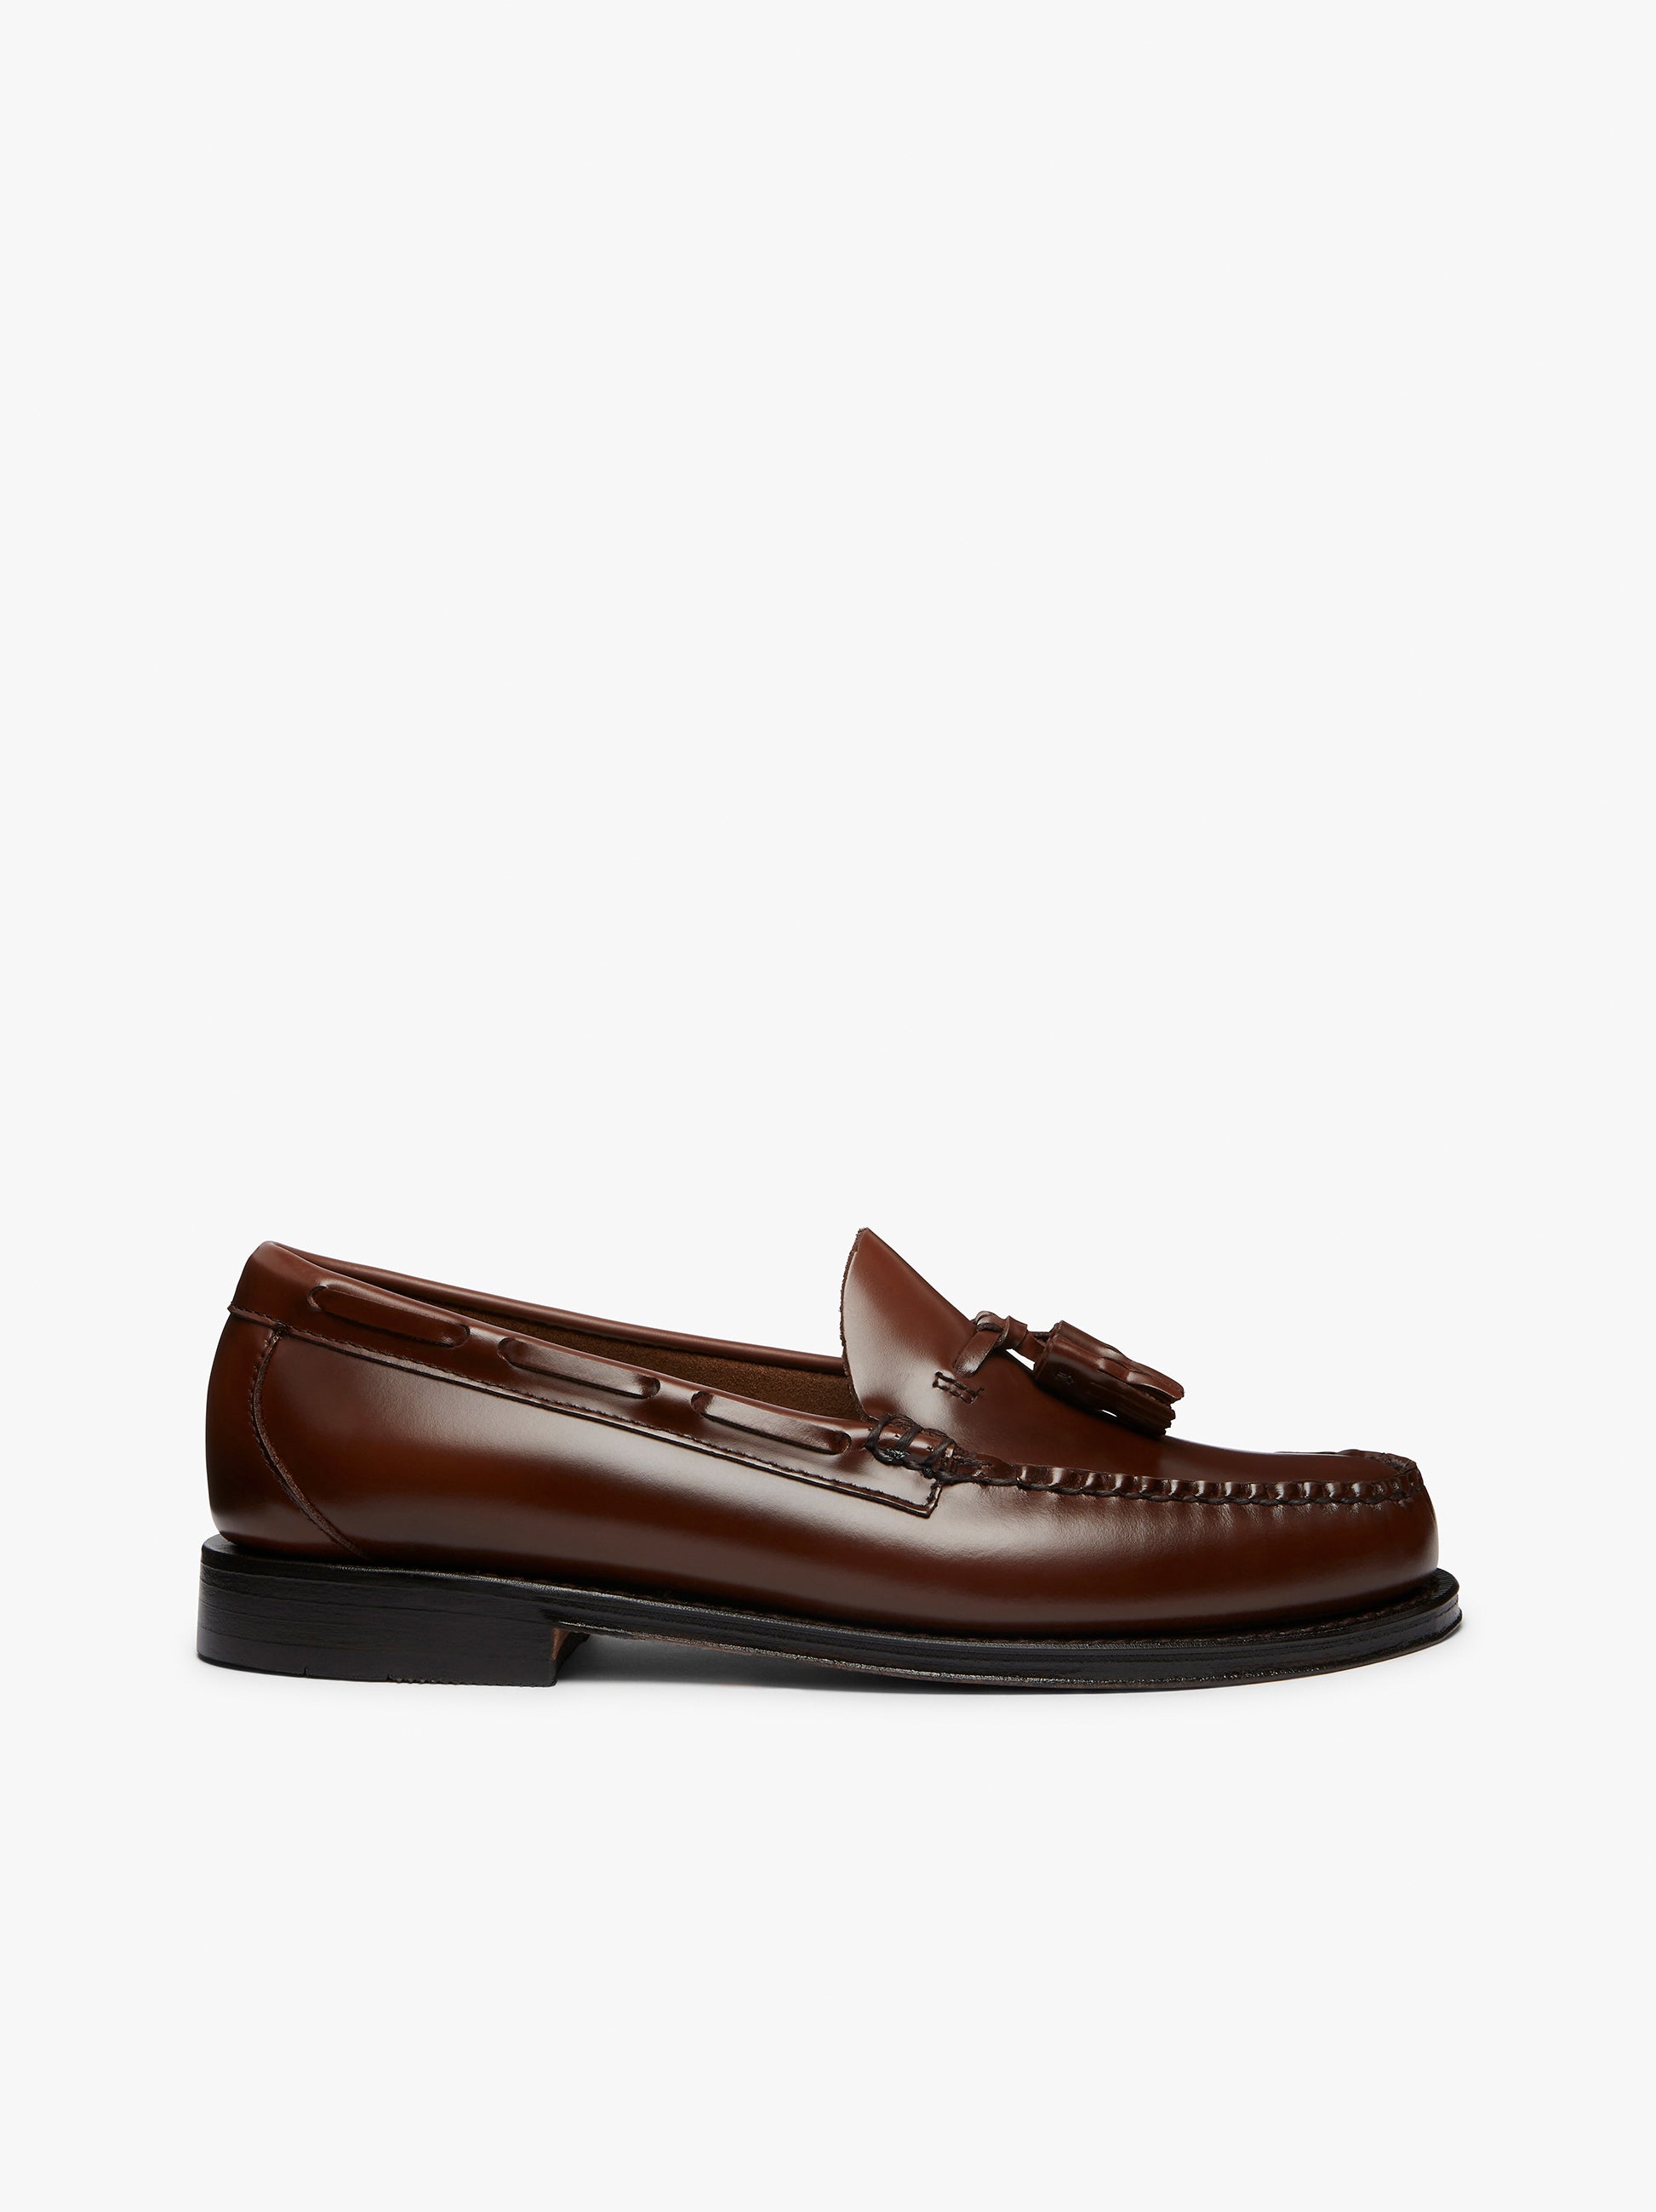 Brown Loafers With Tassels Mens | Bass Weejuns Tassel Loafers